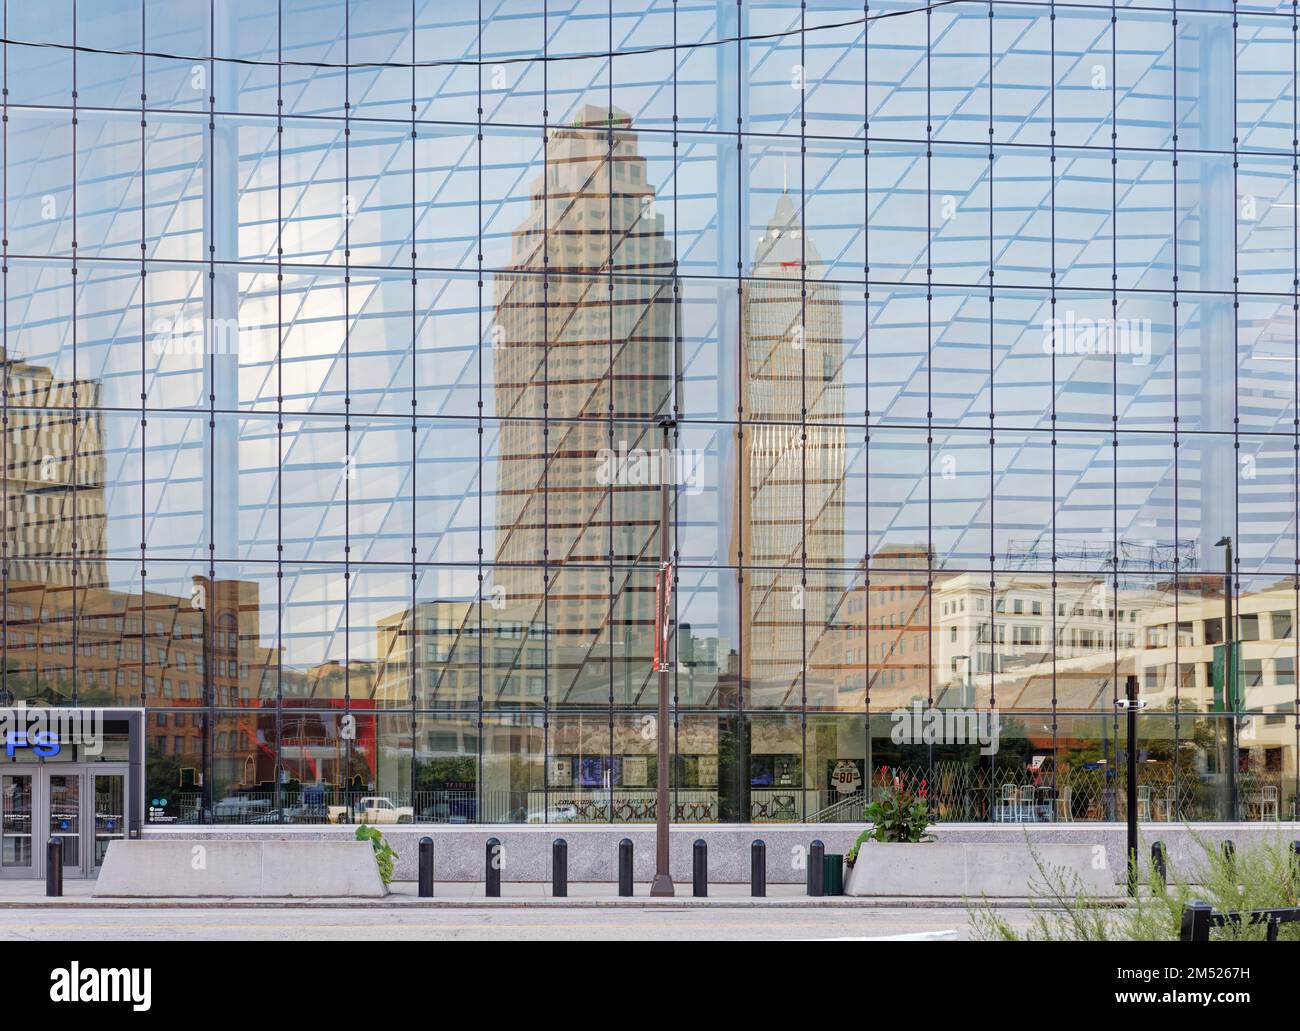 Rocket Mortgage FieldHouse sports and concert arena reflects the heart of downtown Cleveland with its new (2020) curtain walls. Stock Photo